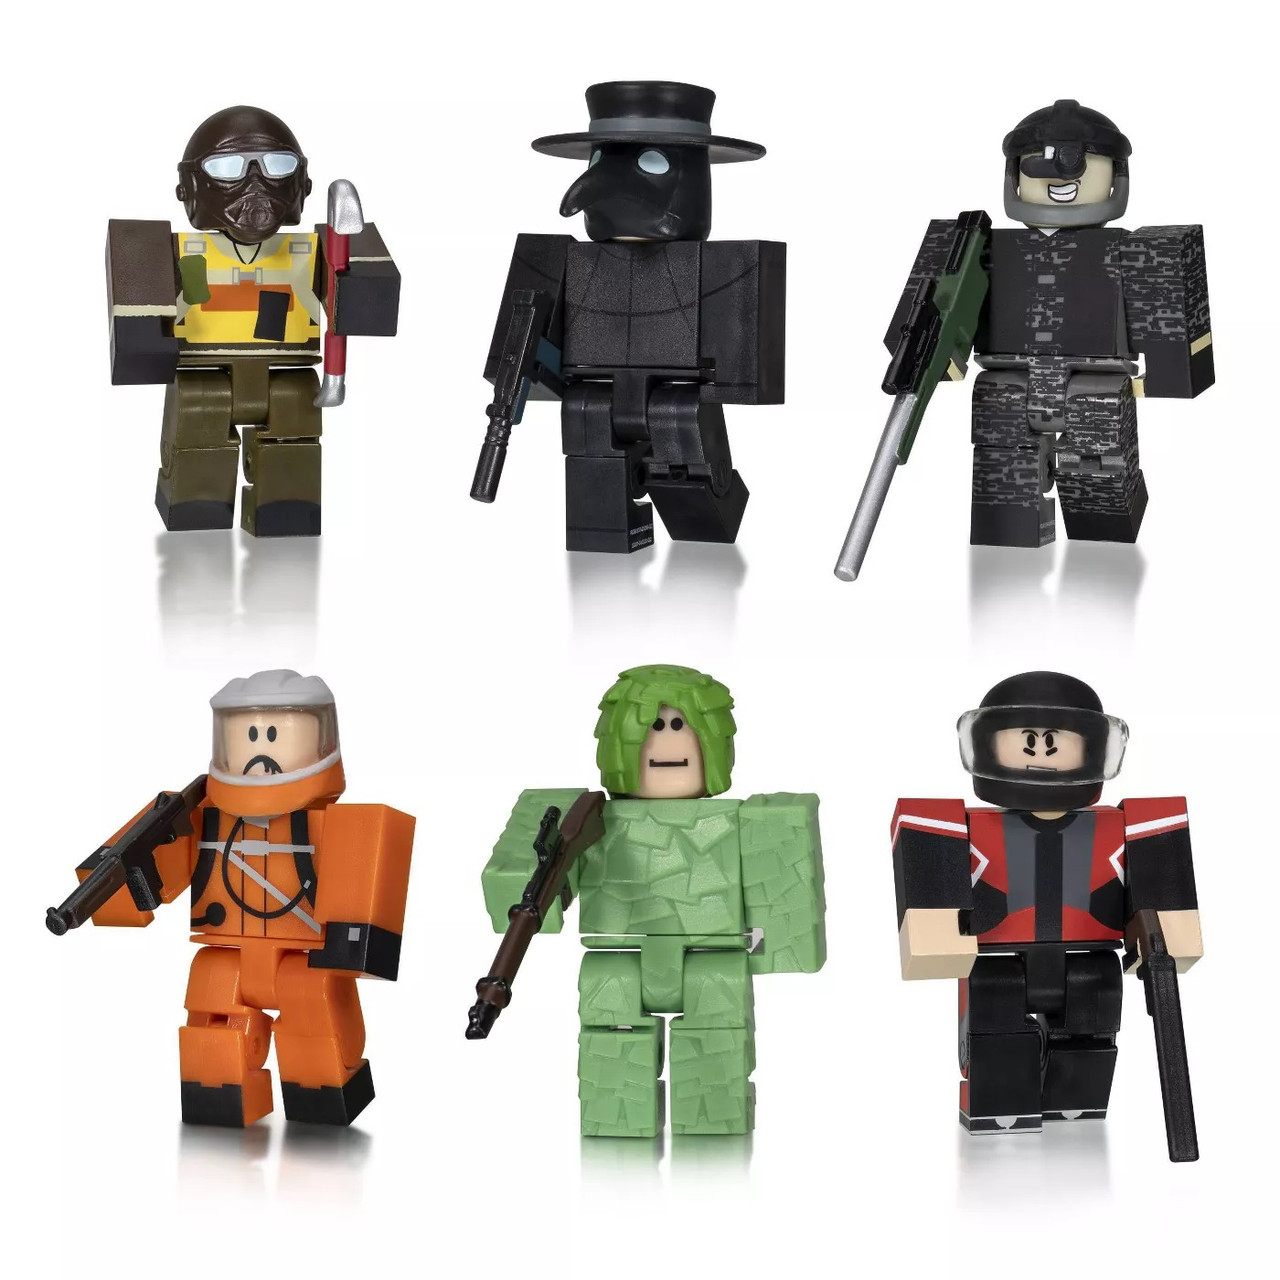 N3jev1sdkhc2mm - zombie officer roblox toy what game is he from